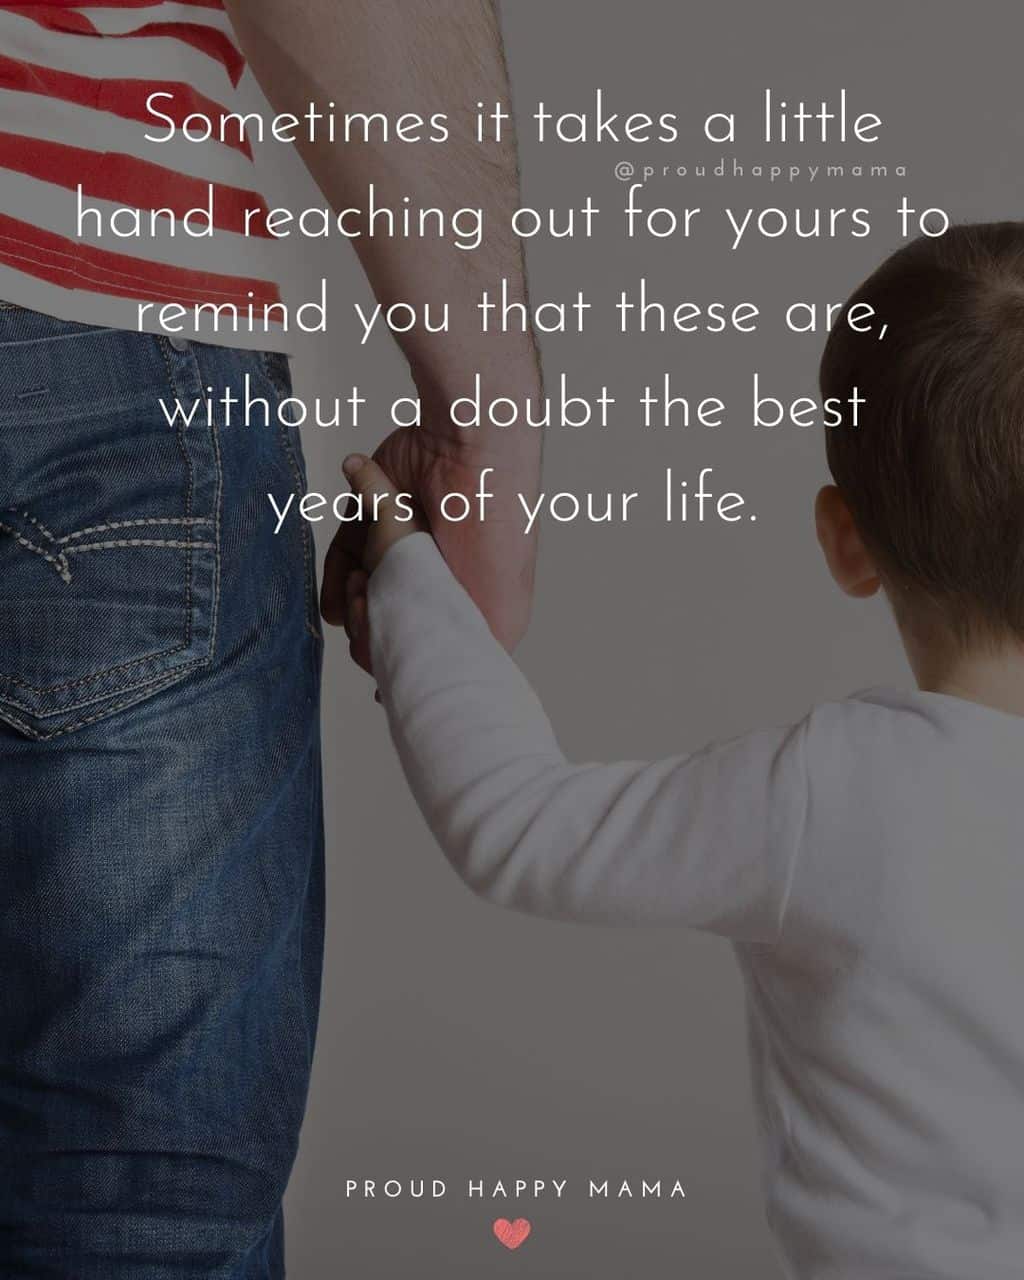 Parenting Quotes - Sometimes it takes a little hand reaching out for yours to remind you that these are, without a doubt the best years of